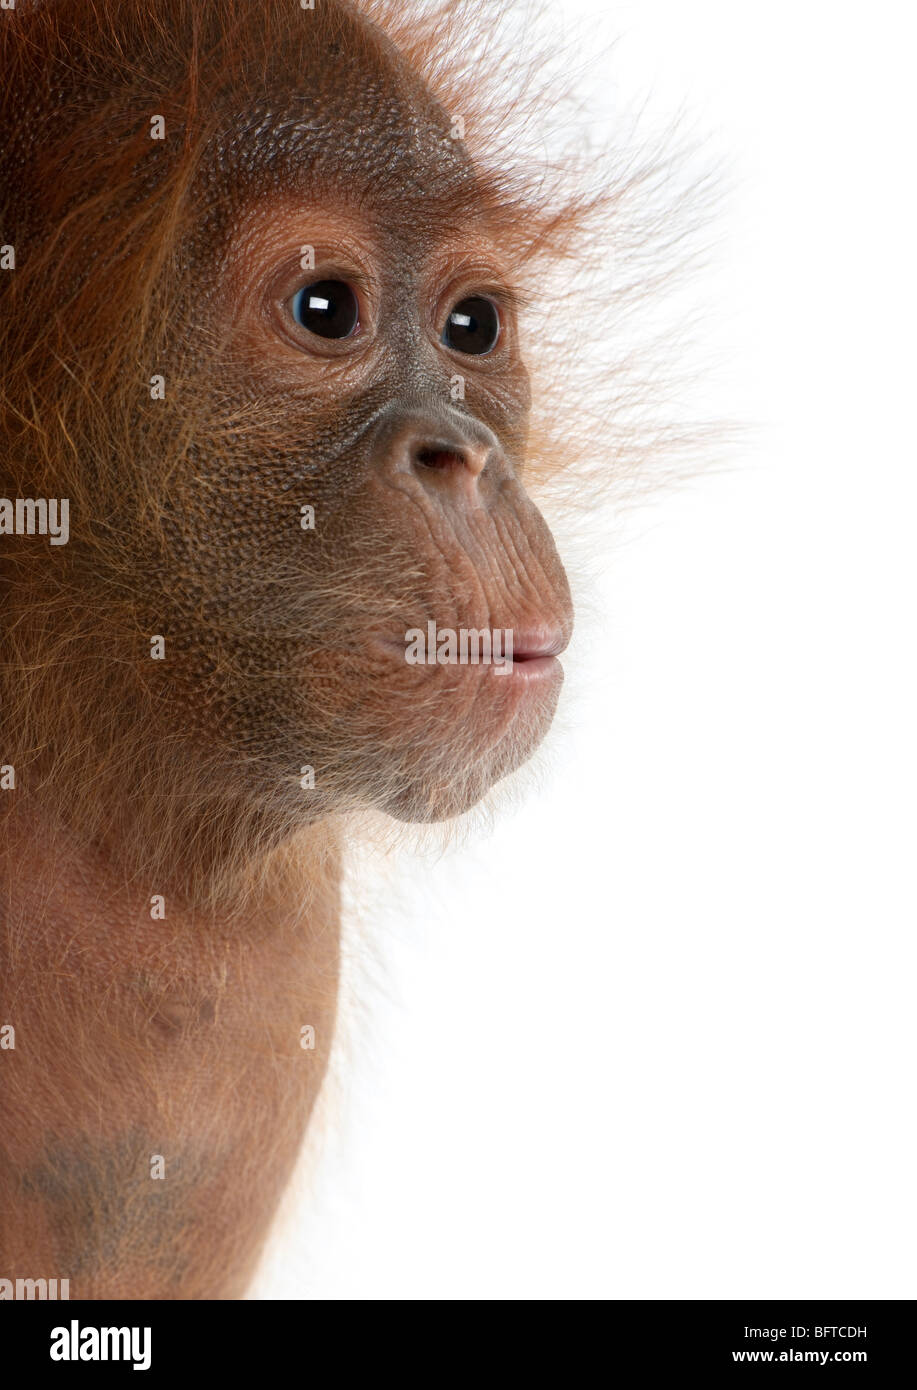 Close-up of baby Sumatran Orangutan, 4 months old, in front of white background Stock Photo